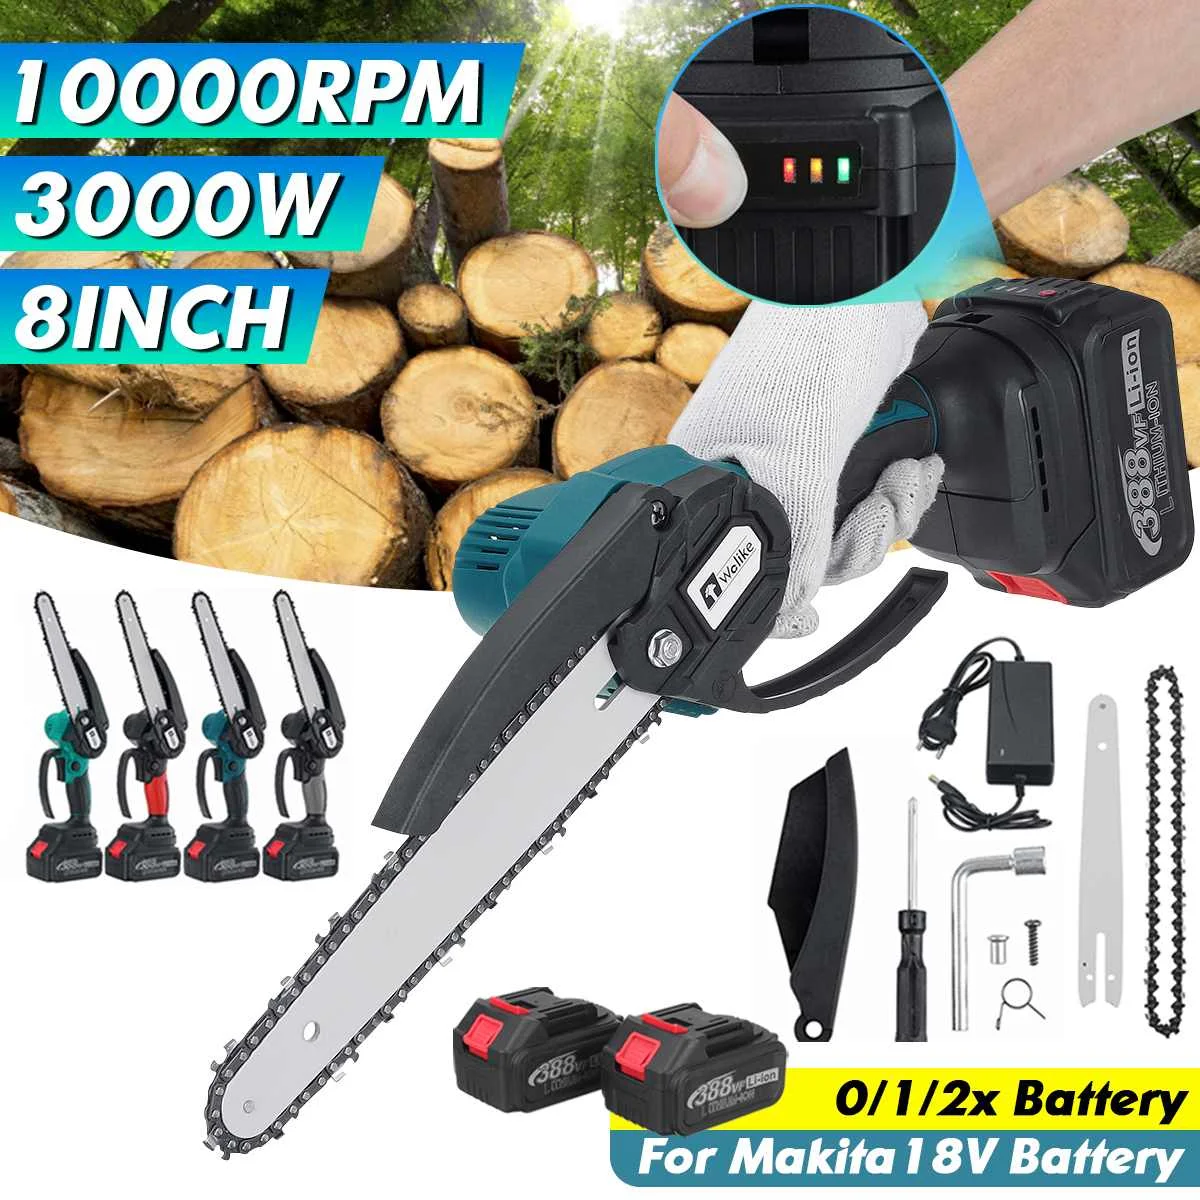 

3000W 8 Inch Brushless Mini Electric Chainsaw Rechargeable Li-ion Battery Pruning Saw Woodworking Tool For Makita 18V Battery